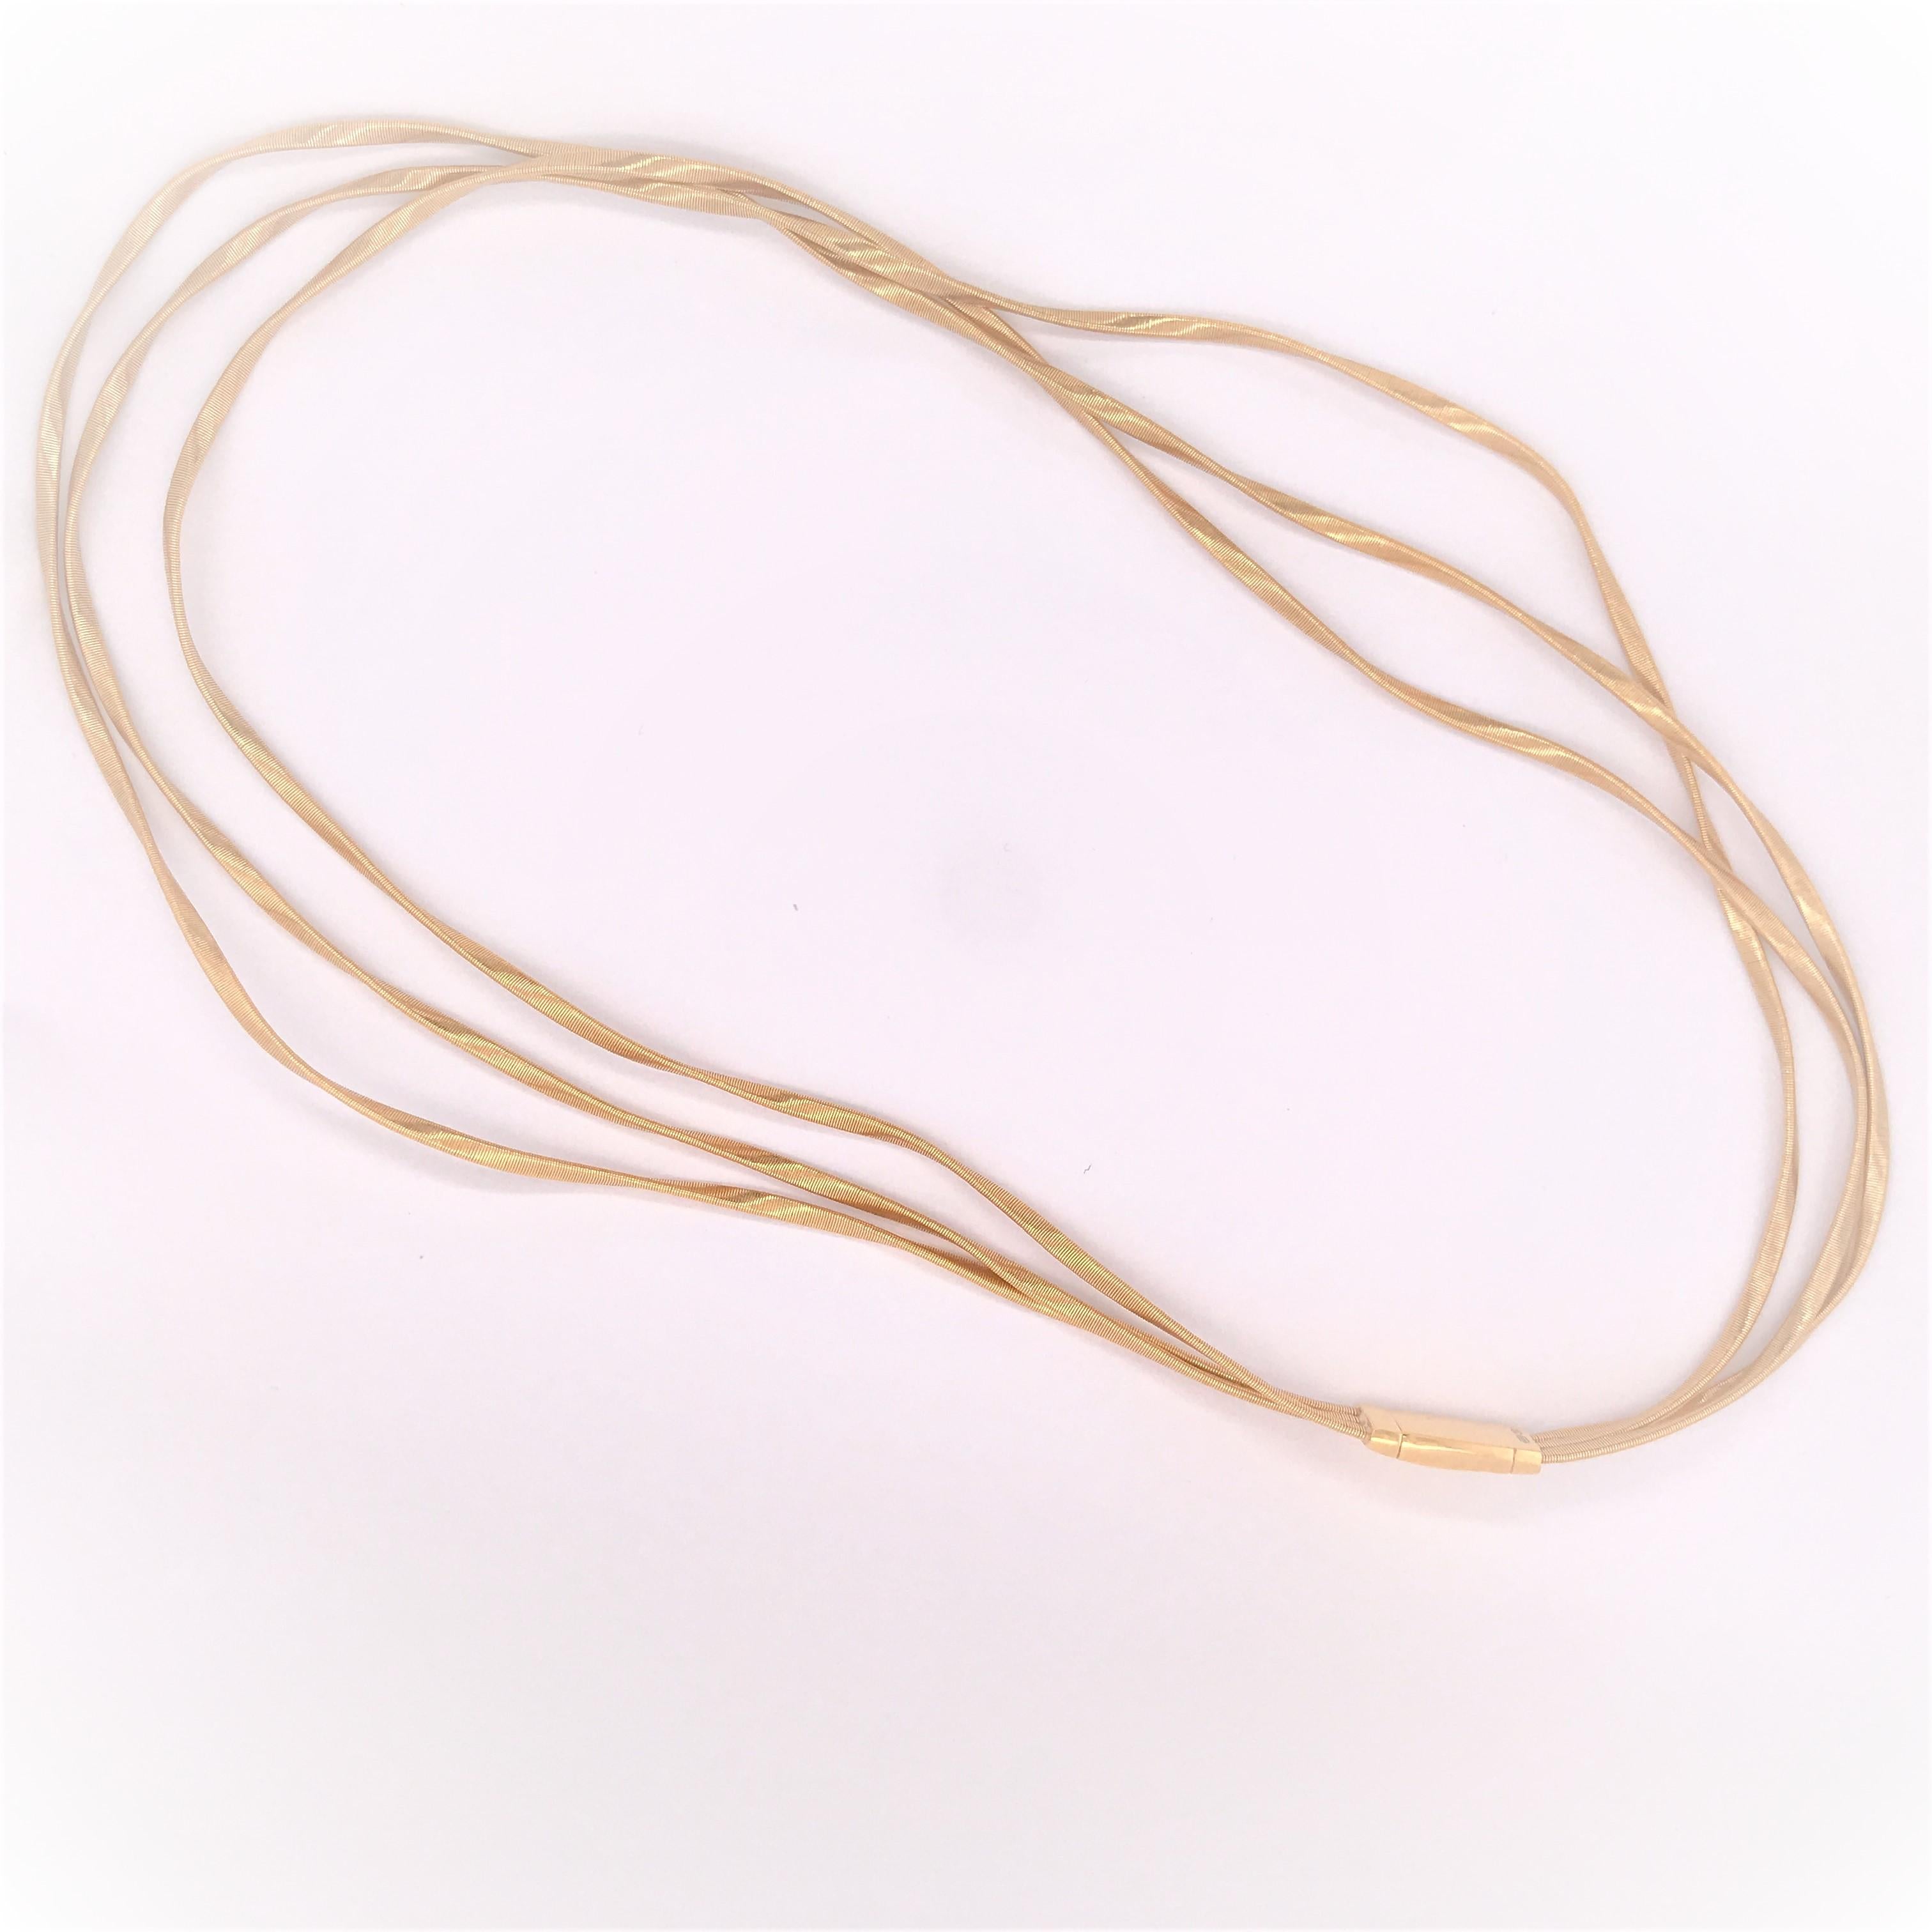 Marco Bicego necklace from the Marrakech Collection in 18K Yellow Gold. Three twisted strands. Approximately 16.5 inches in length and 3/8 inch in width. Logo-engraved push clasp. 37.9 grams.